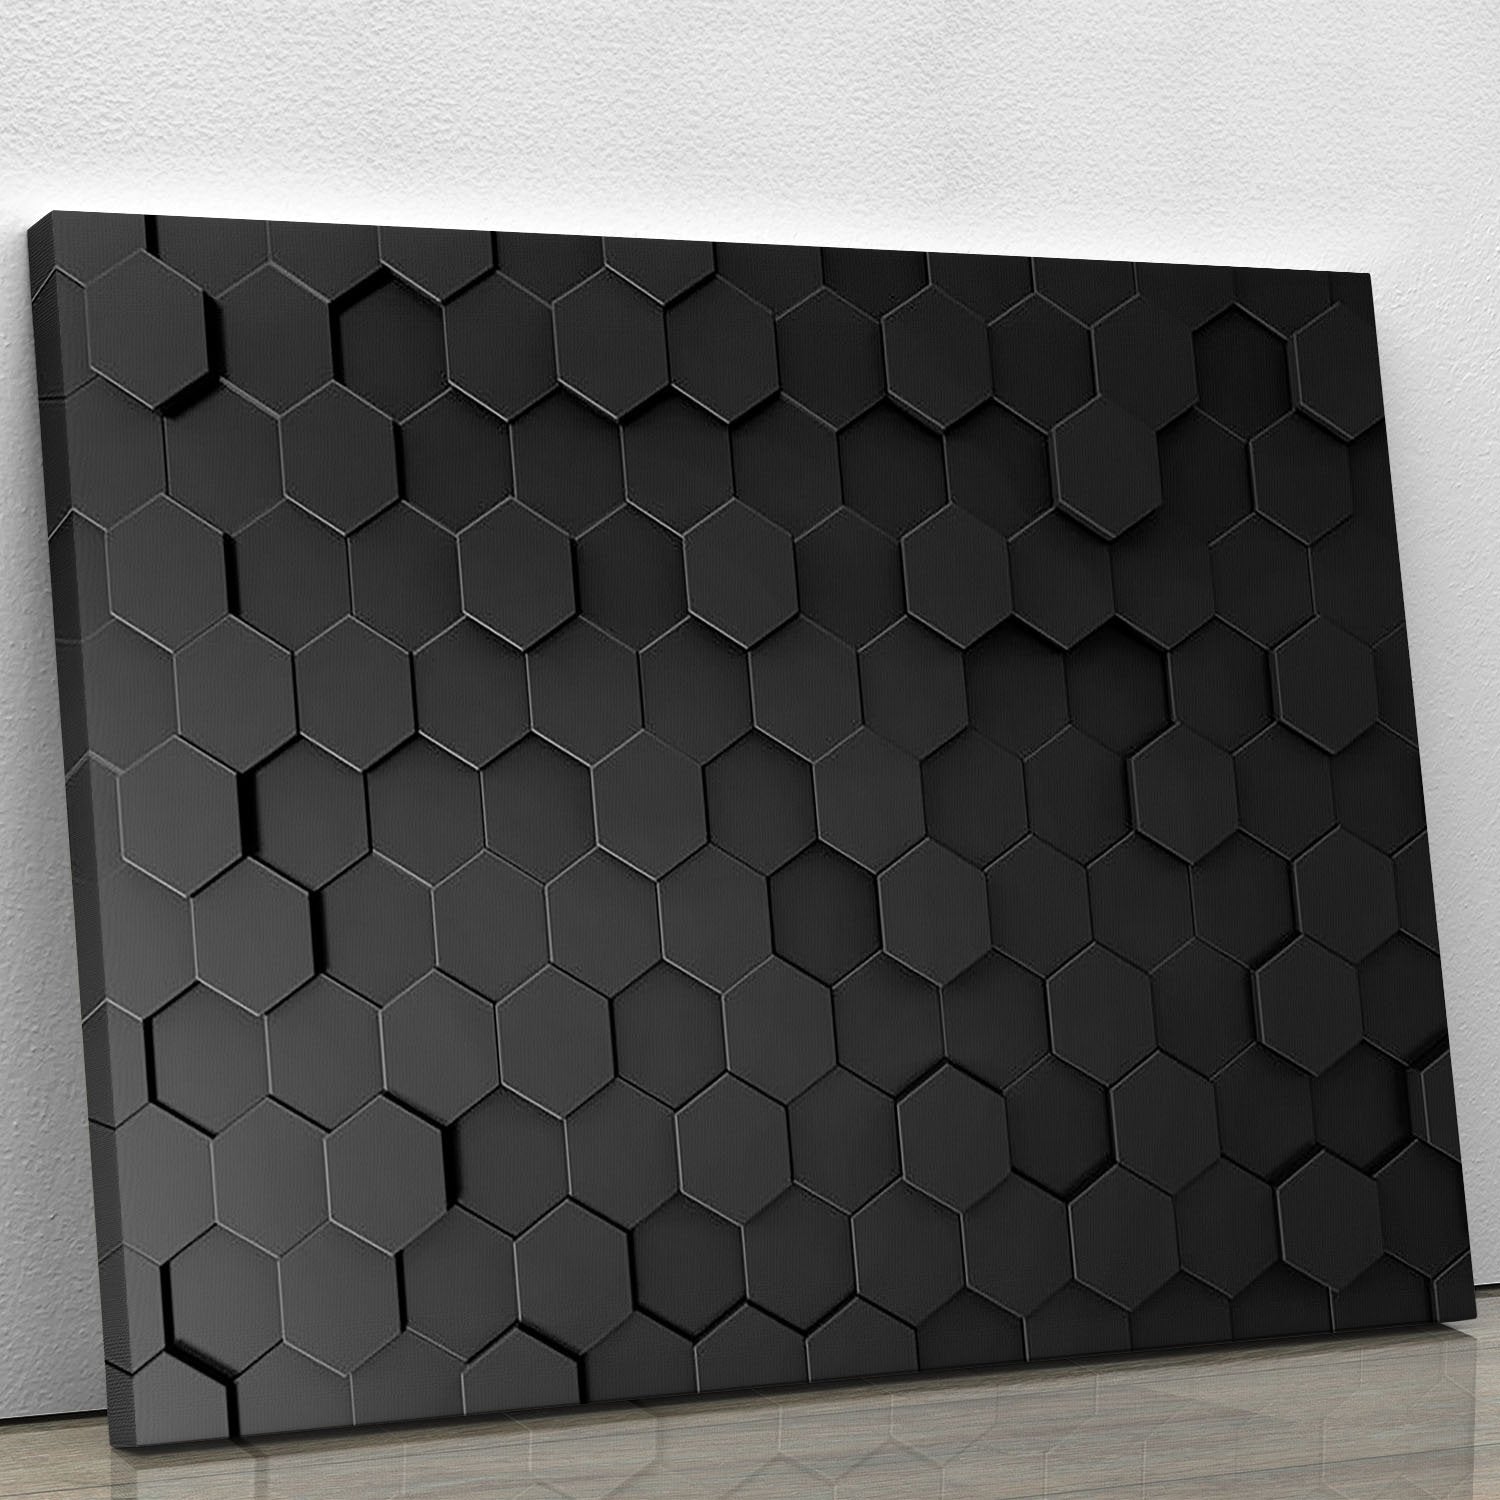 Black Hexagon Pattern Canvas Print or Poster